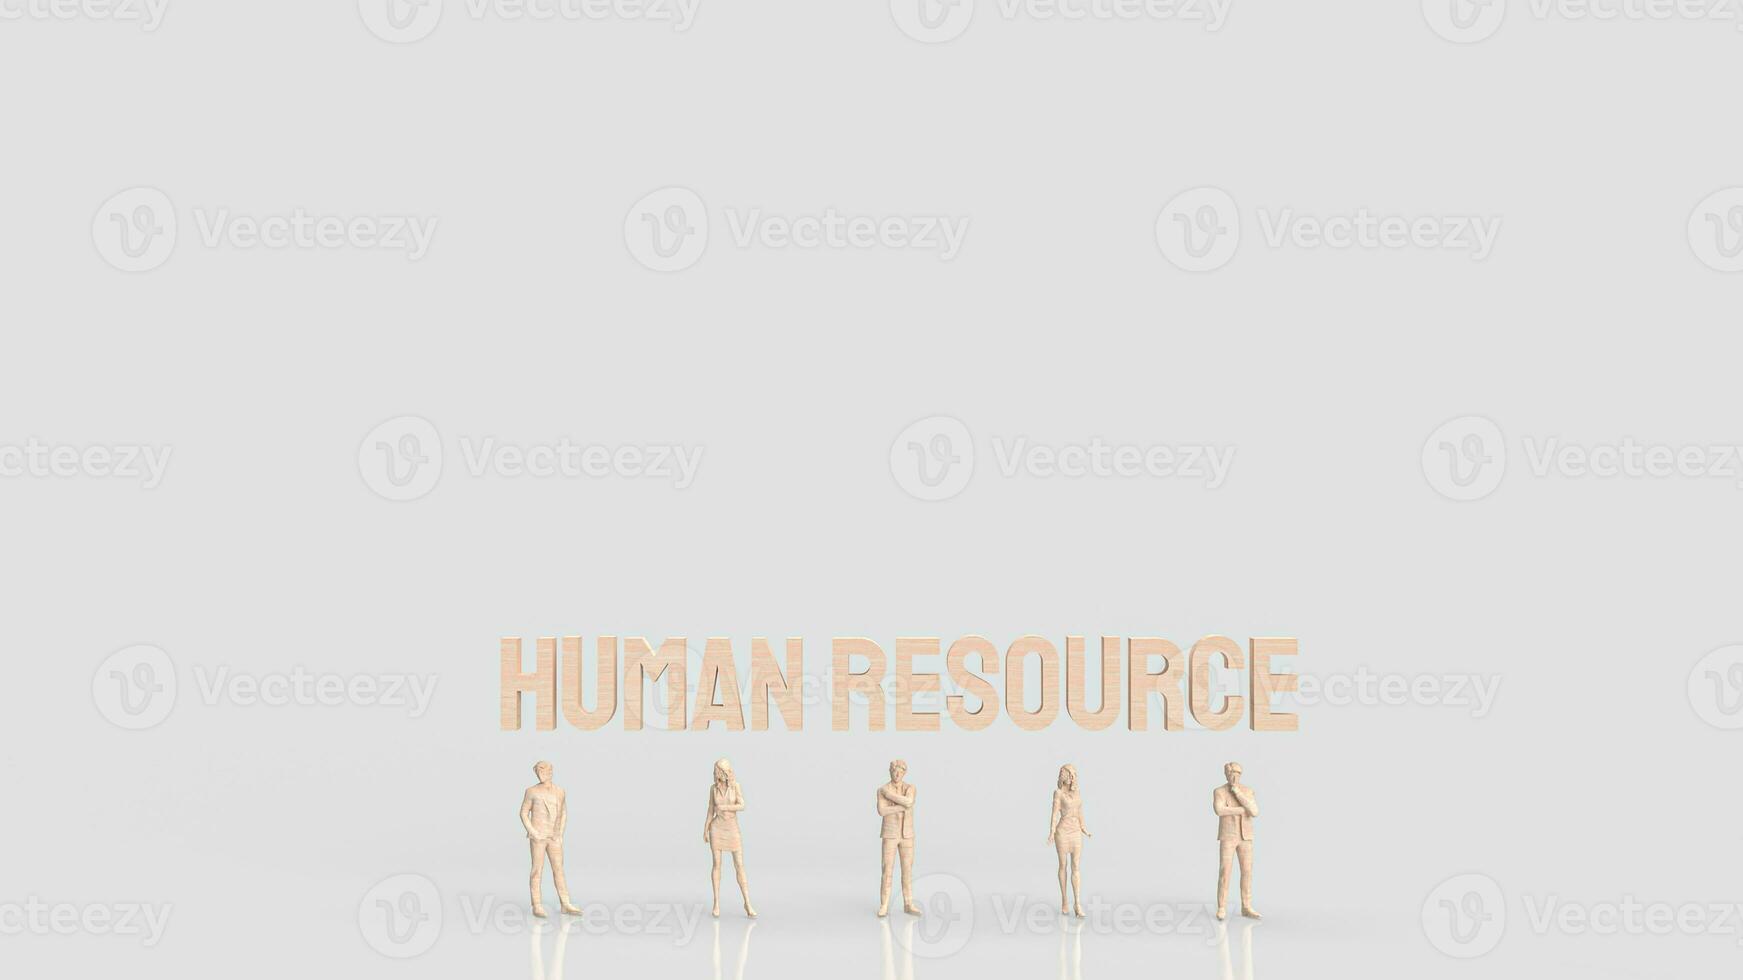 The Human resources Text and human figure for Business concept 3d rendering photo